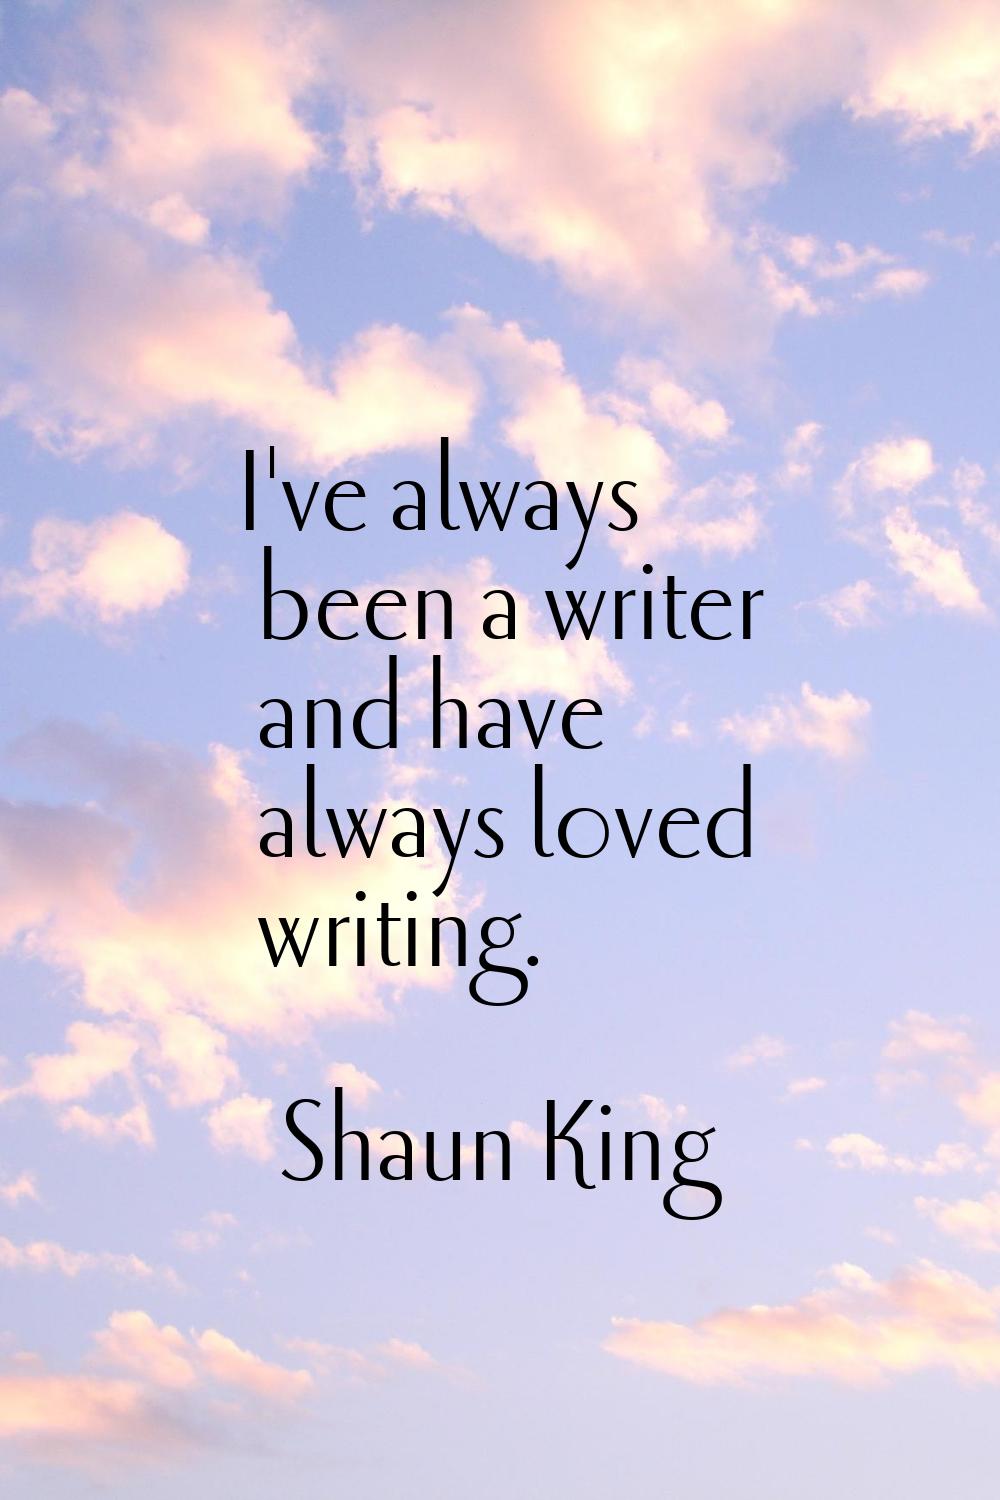 I've always been a writer and have always loved writing.